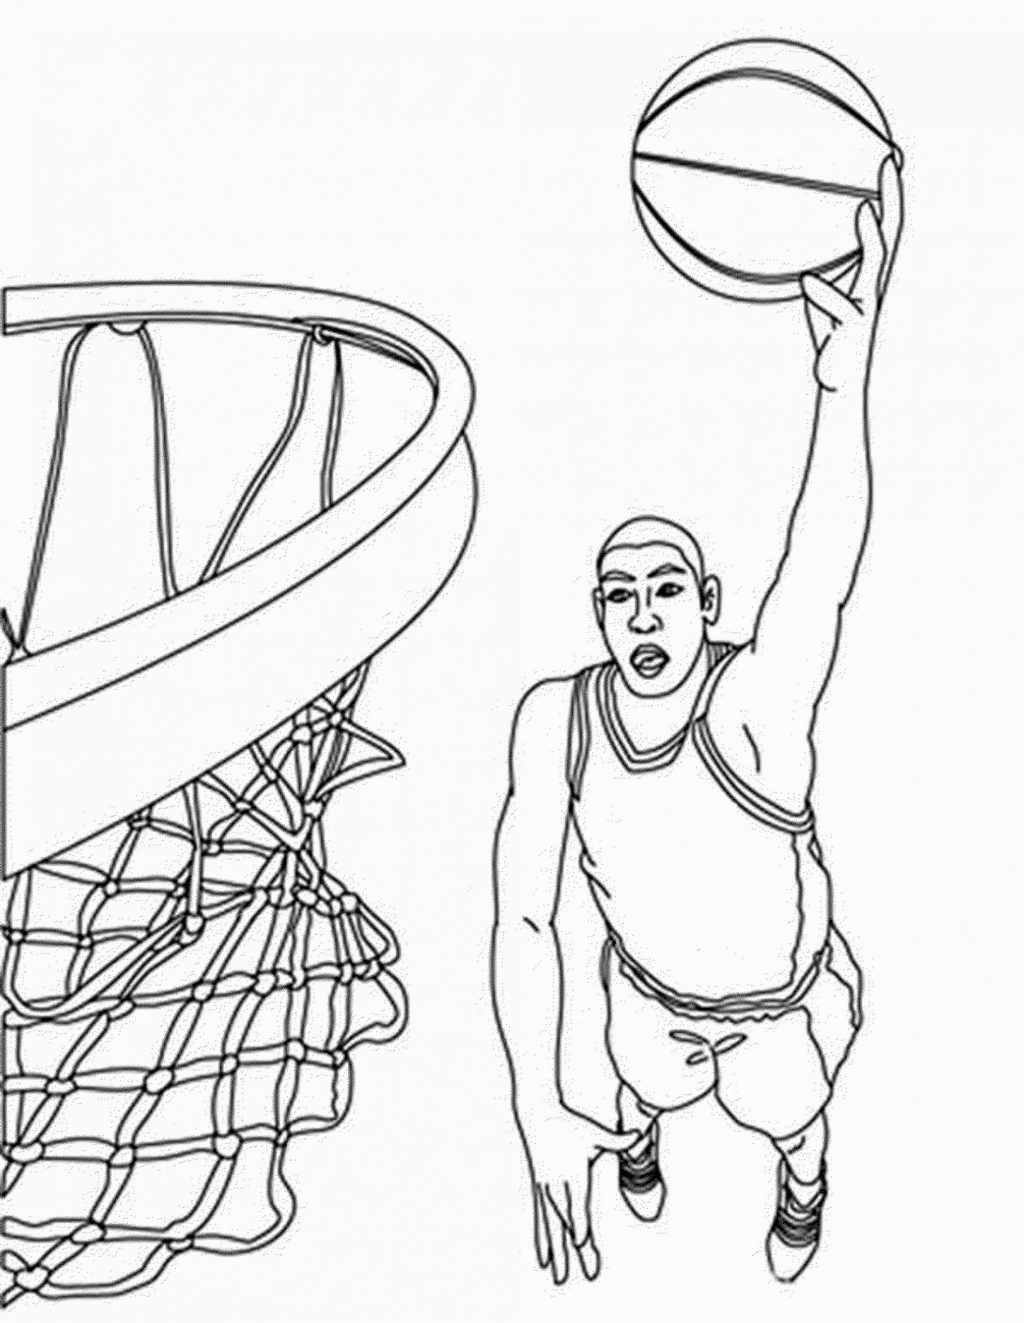 Coloring pages basketball playering pages book nba for kids free lebron james